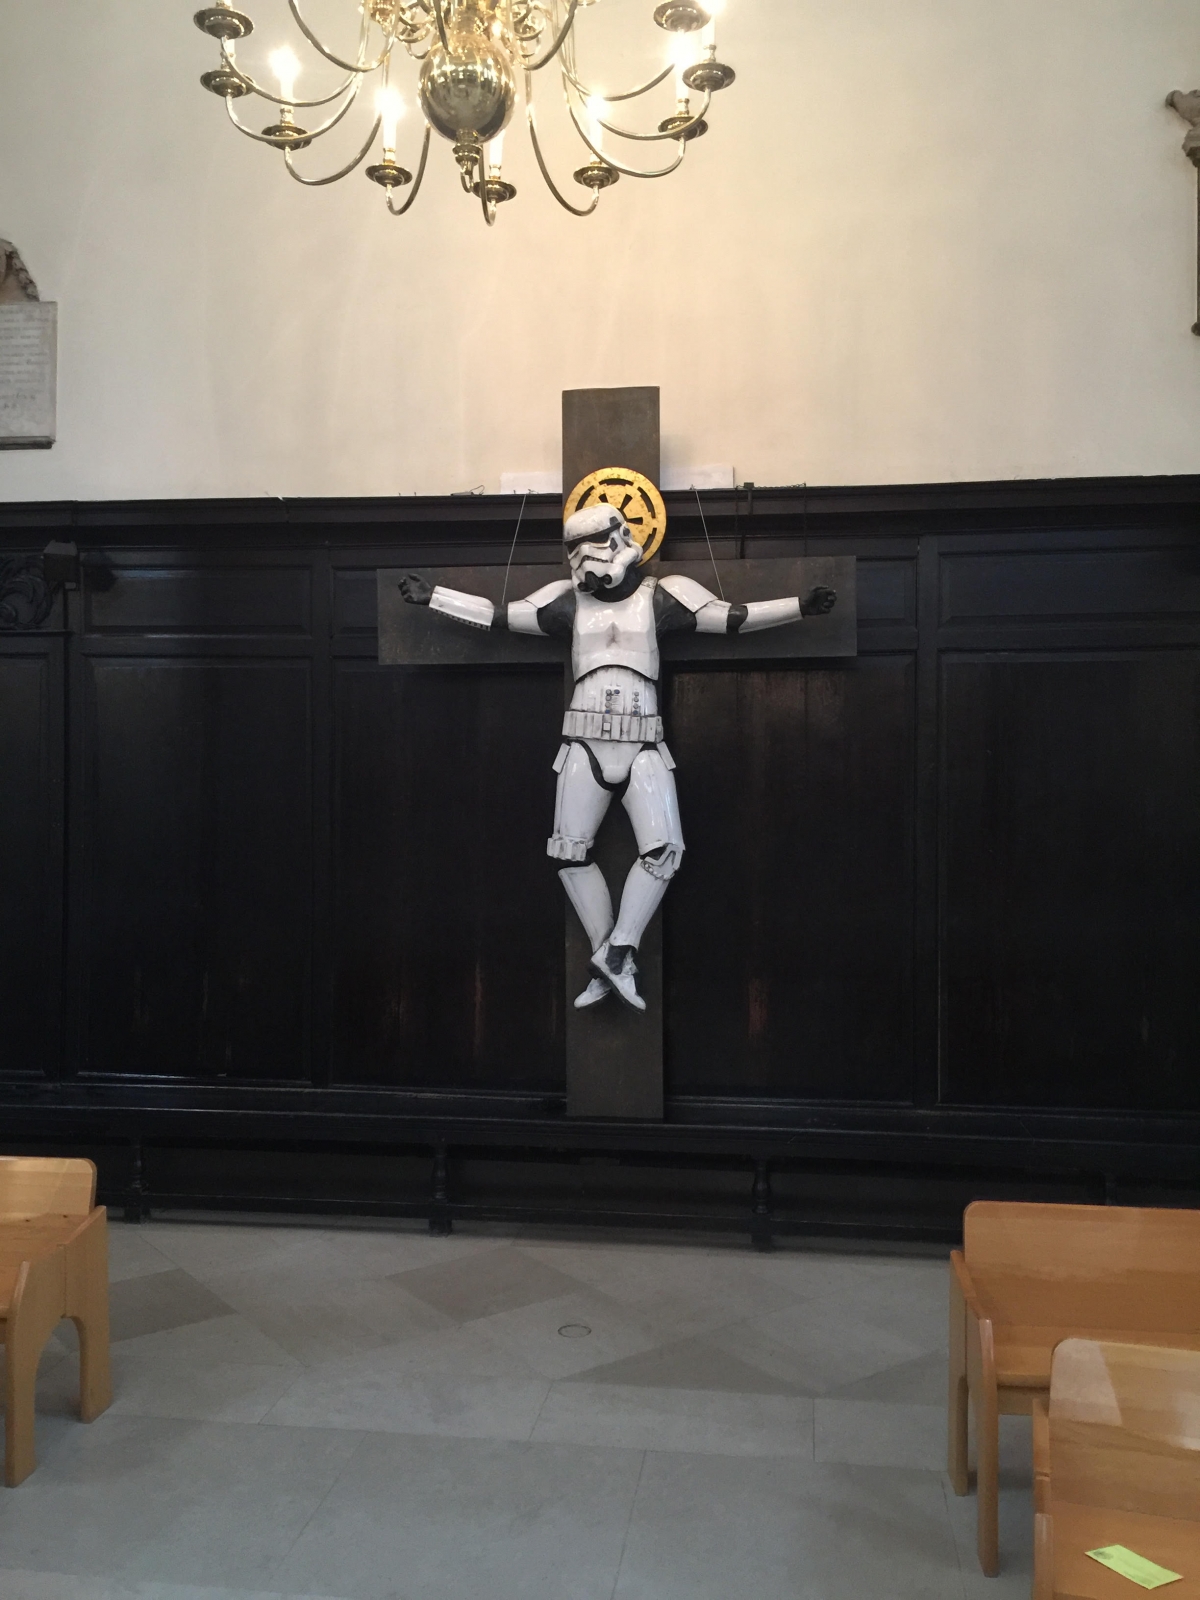 Controversial crucified Stormtrooper art relocated at London church